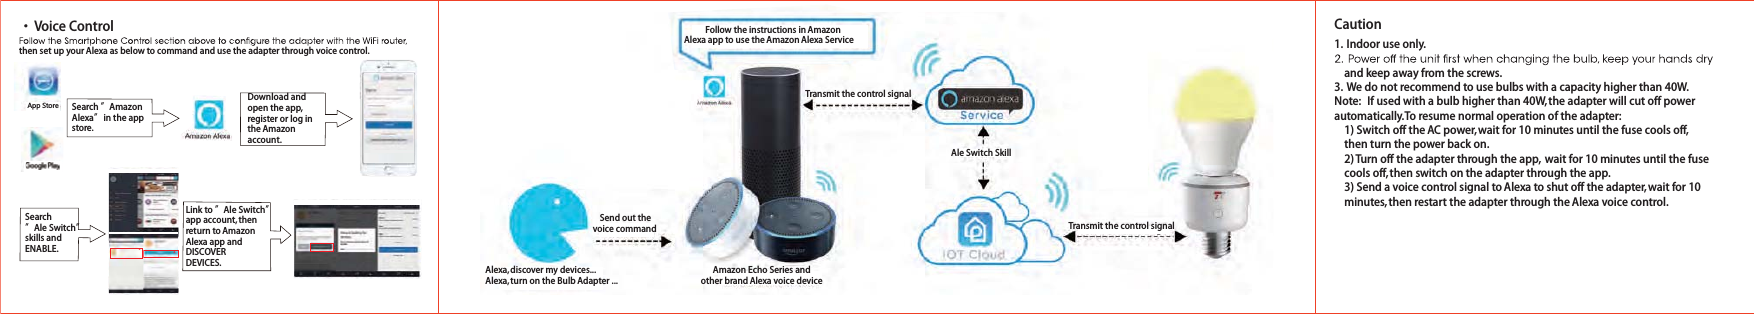 Alexa, discover my devices... Alexa, turn on the Bulb Adapter ...Send out the voice commandAle Switch Skill Transmit the control signalTransmit the control signalAmazon Echo Series and other brand Alexa voice deviceFollow the instructions in Amazon Alexa app to use the Amazon Alexa ServiceSearch”Ale Switch”skills and ENABLE. ・ Voice ControlLink to ”Ale Switch”app account, then return to Amazon Alexa app and DISCOVER DEVICES.Caution1.  Indoor use only.    and keep away from the screws.3.  We do not recommend to use bulbs with a capacity higher than 40W.Note:  If used with a bulb higher than 40W, the adapter will cut off power automatically. To resume normal operation of the adapter:    1) Switch off the AC power, wait for 10 minutes until the fuse cools off,     then turn the power back on.     2) Turn off the adapter through the app,  wait for 10 minutes until the fuse     cools off, then switch on the adapter through the app.    3) Send a voice control signal to Alexa to shut off the adapter, wait for 10     minutes, then restart the adapter through the Alexa voice control. Search ”Amazon Alexa” in the app store.Download and open the app, register or log in the Amazon account.then set up your Alexa as below to command and use the adapter through voice control.  &apos;VV9ZUXK